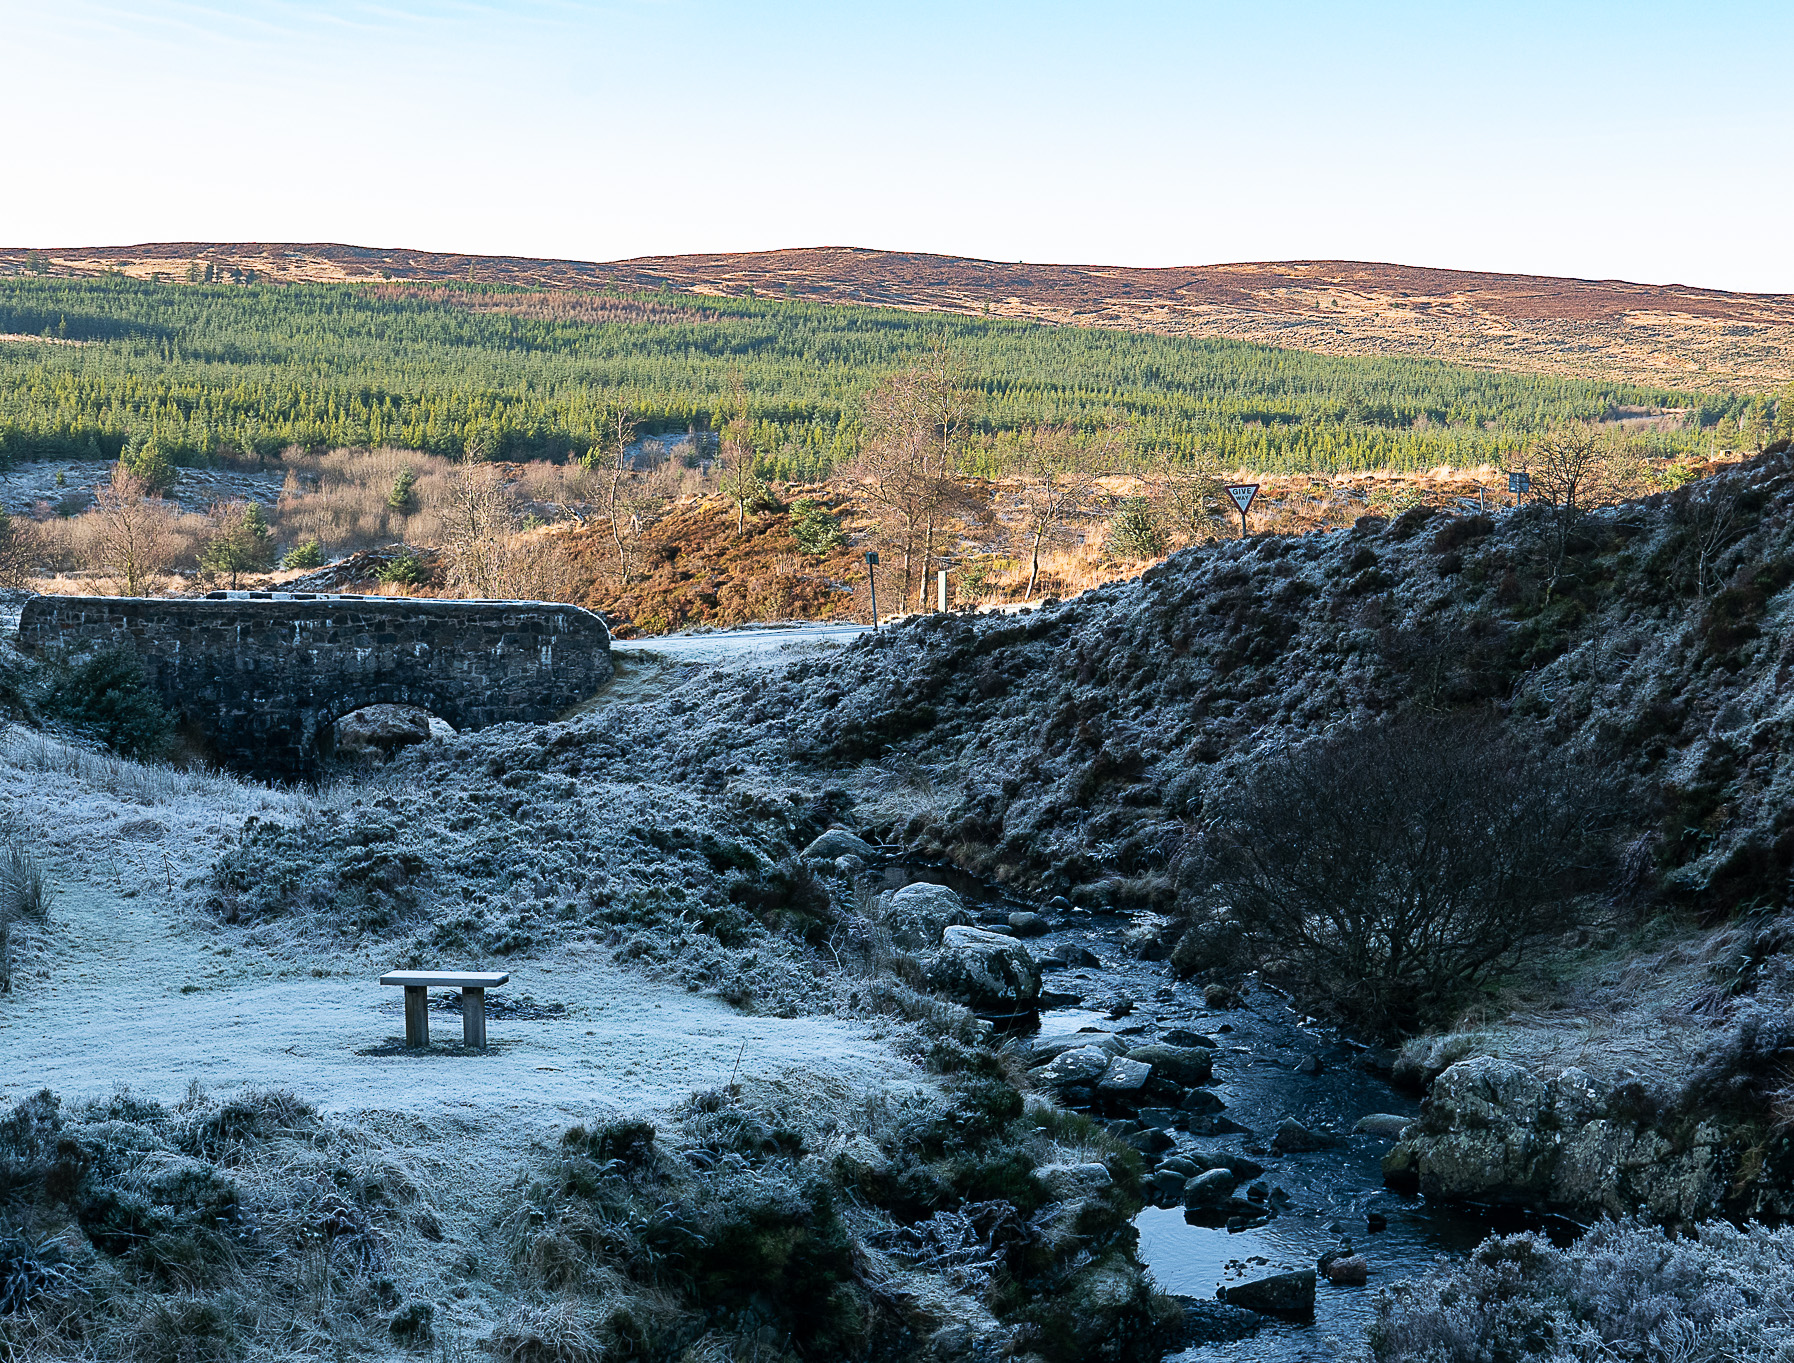 Frosty day with a view to Stinchar Bridge and the waterfalls